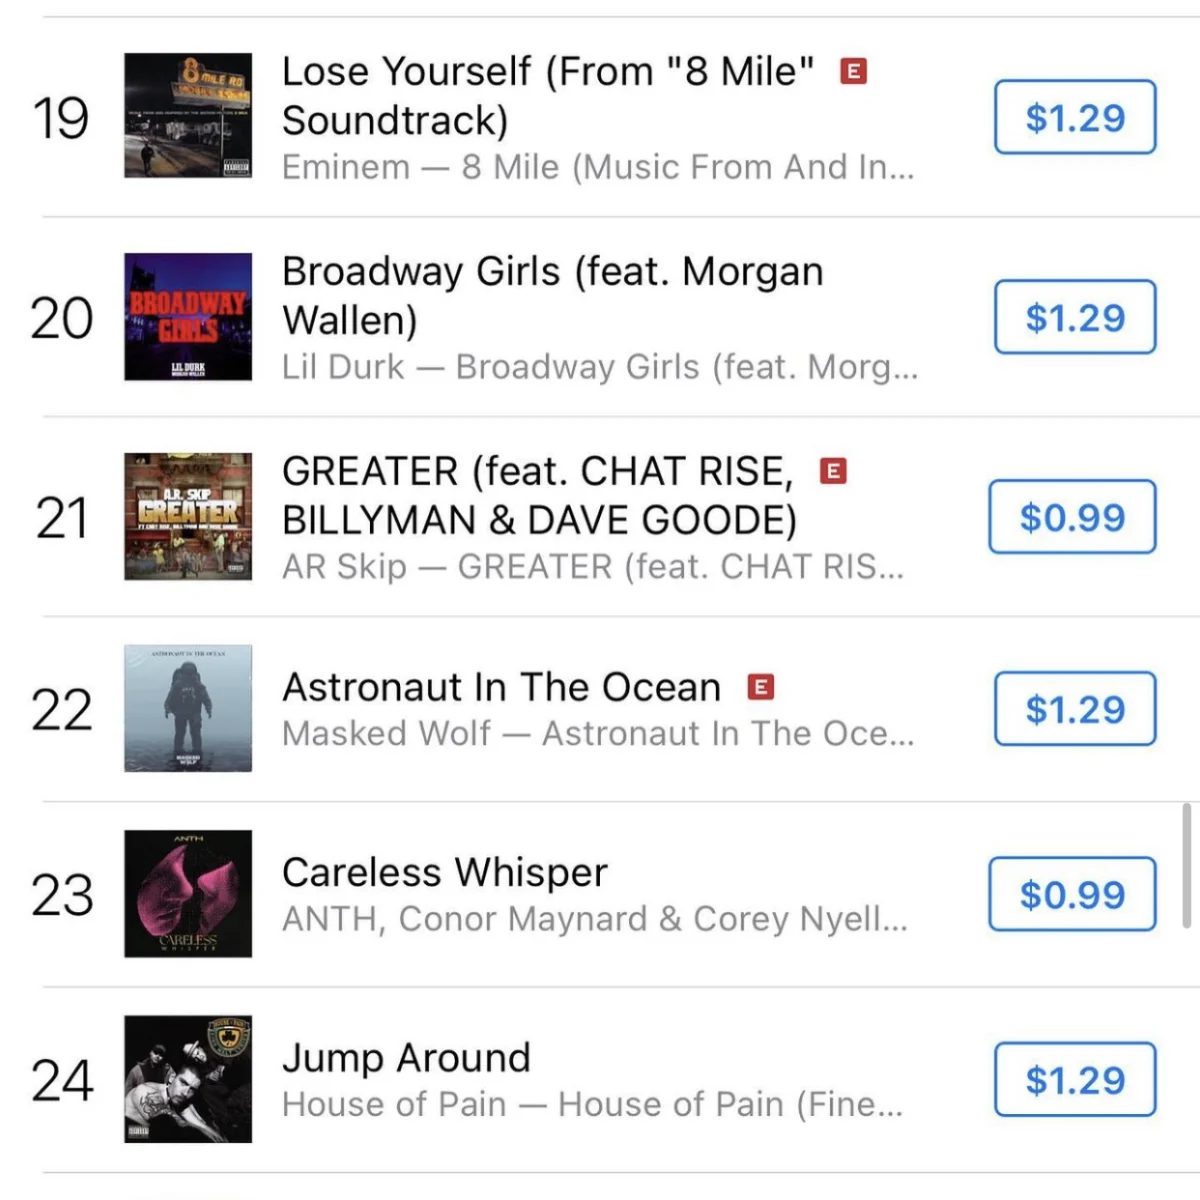 We Got Our Client #21 On The iTunes Charts. We've Charted Over 100+ Songs